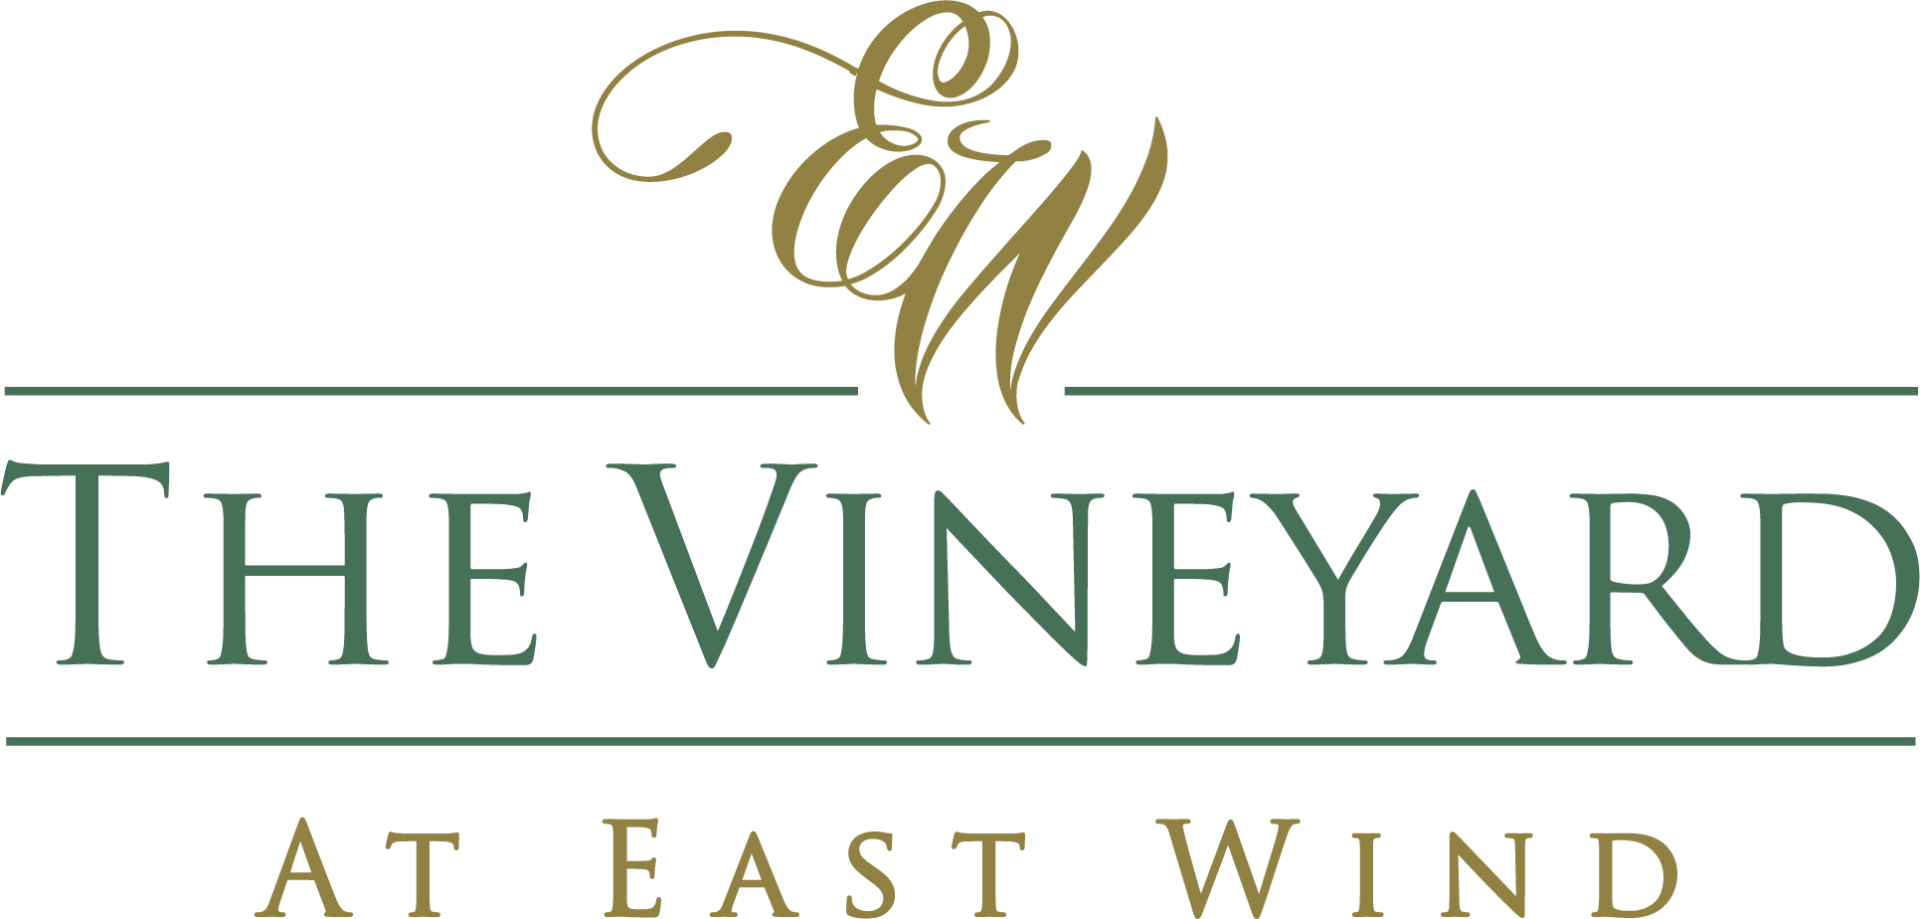 The Vineyard at East Wind